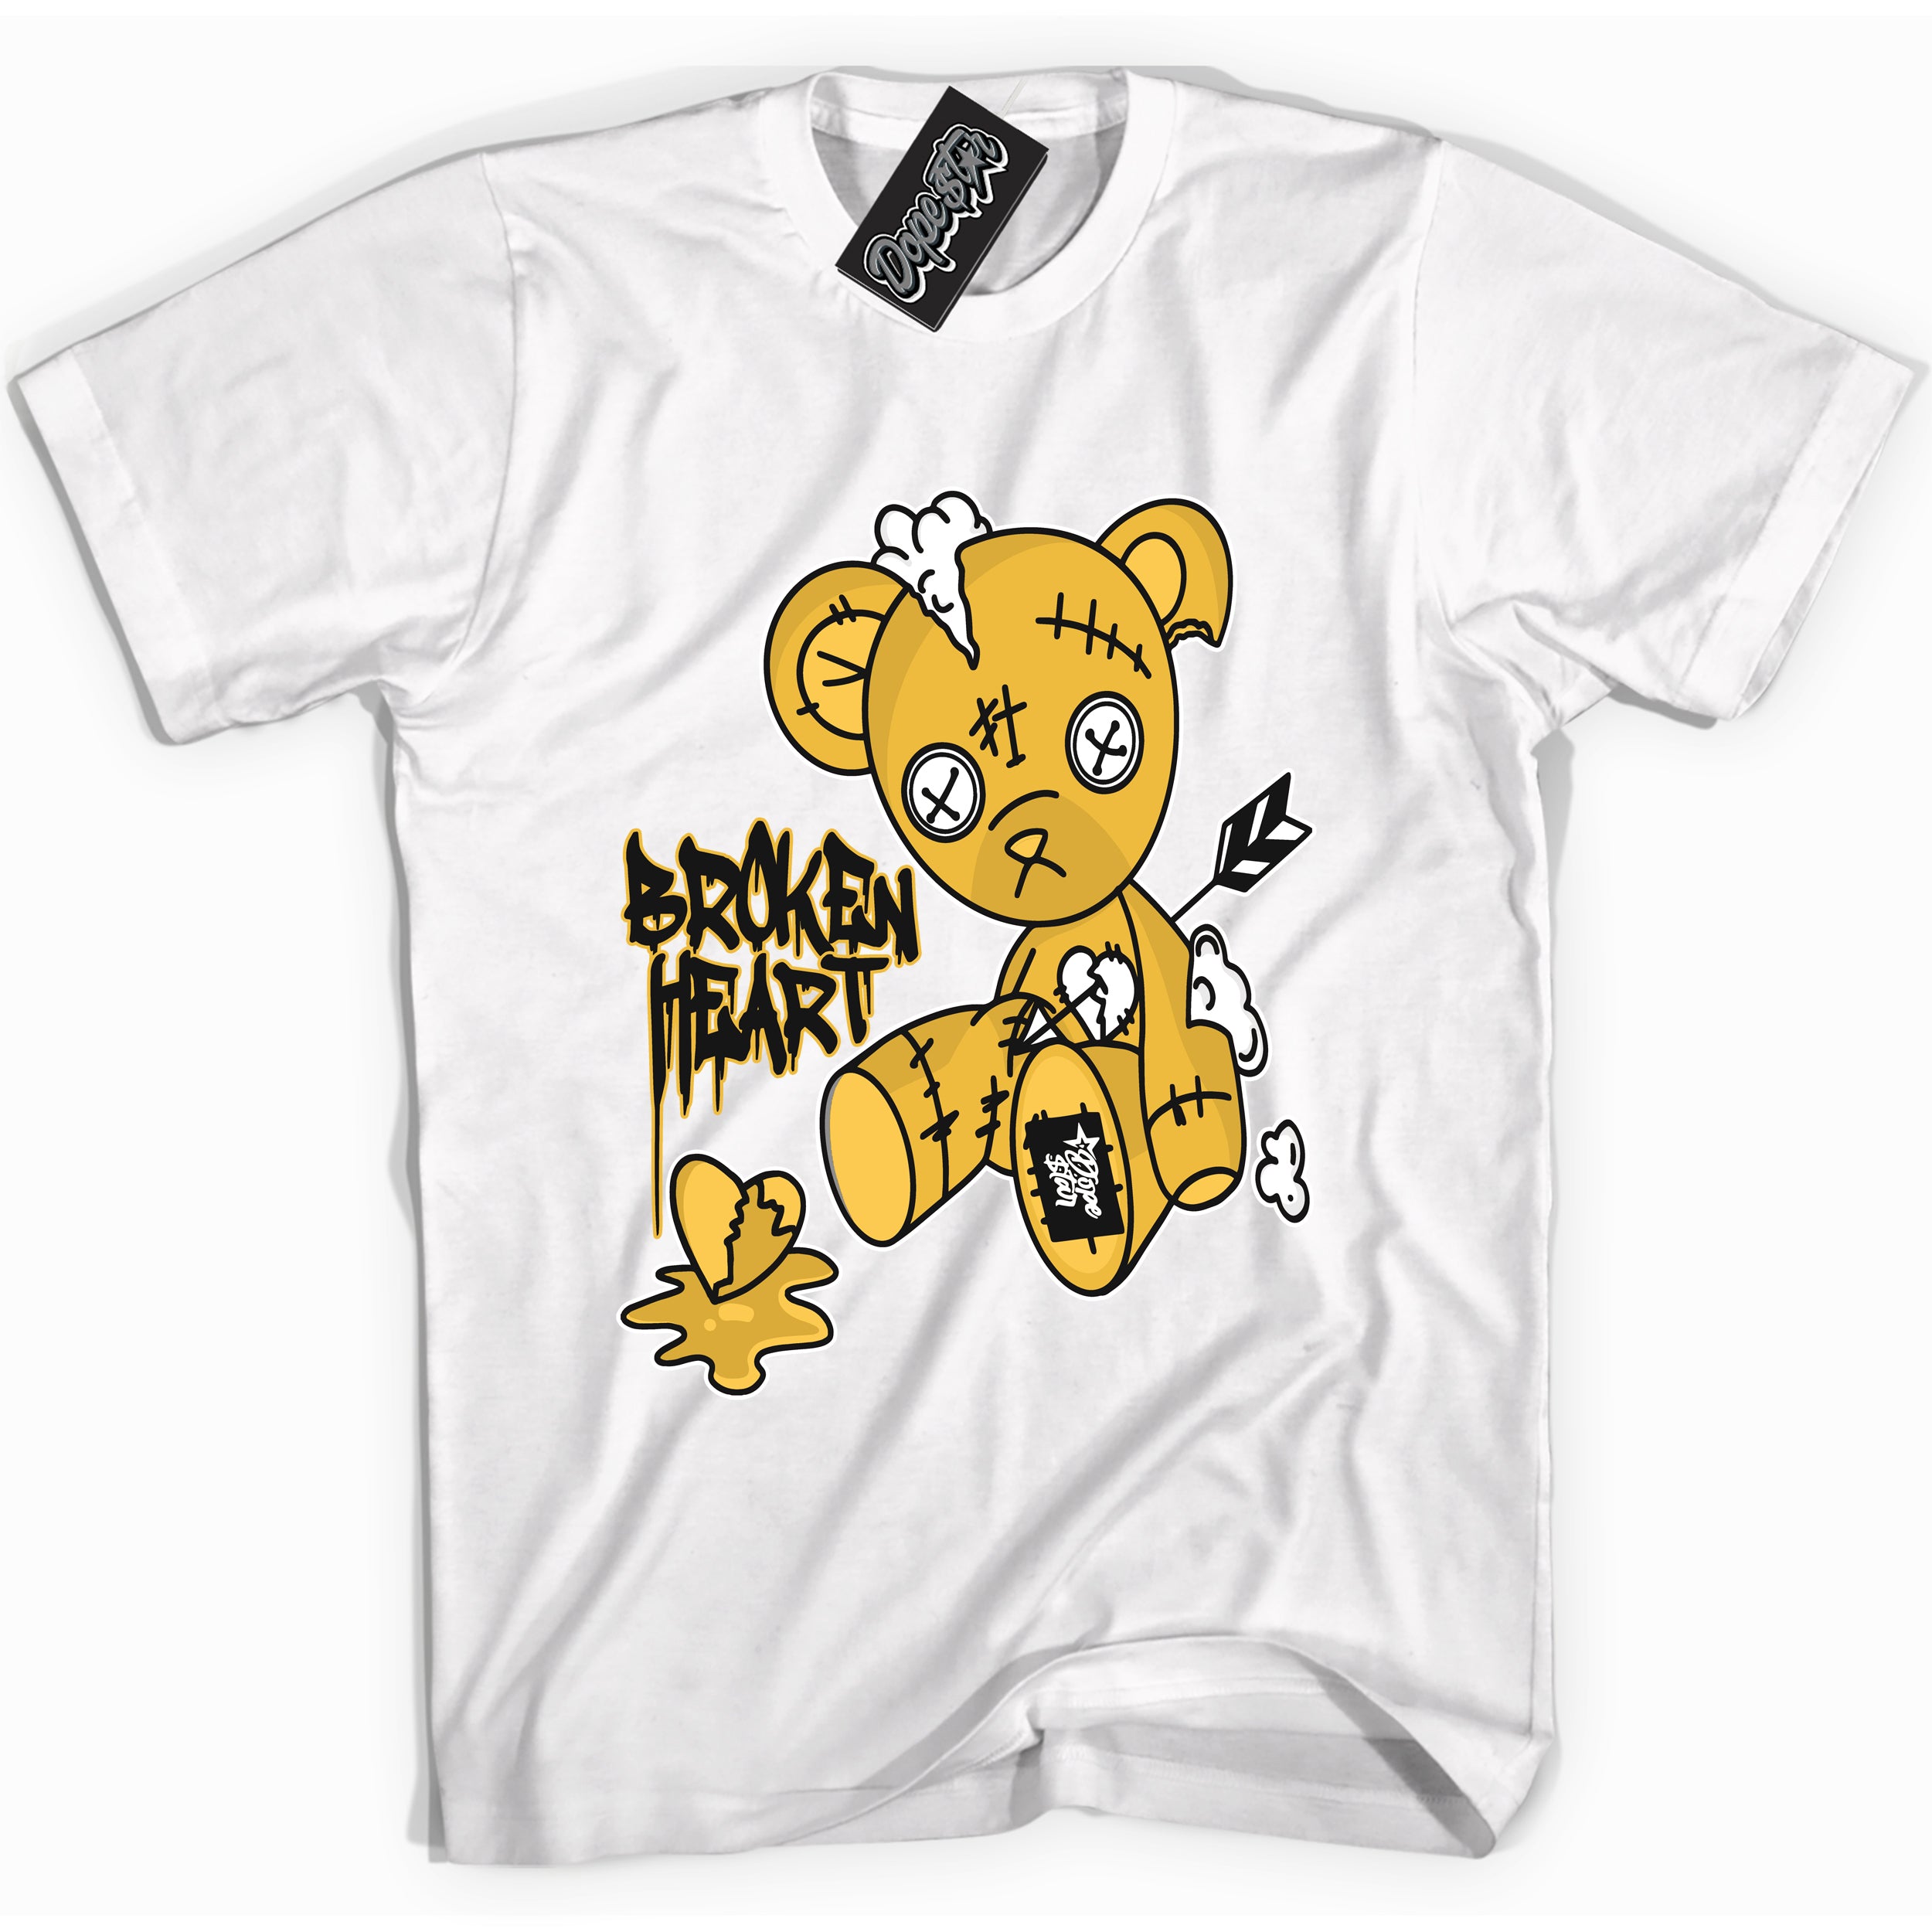 Cool White Shirt With Broken Heart Bear design That Perfectly Matches AIR JORDAN 6 RETRO YELLOW OCHRE Sneakers.